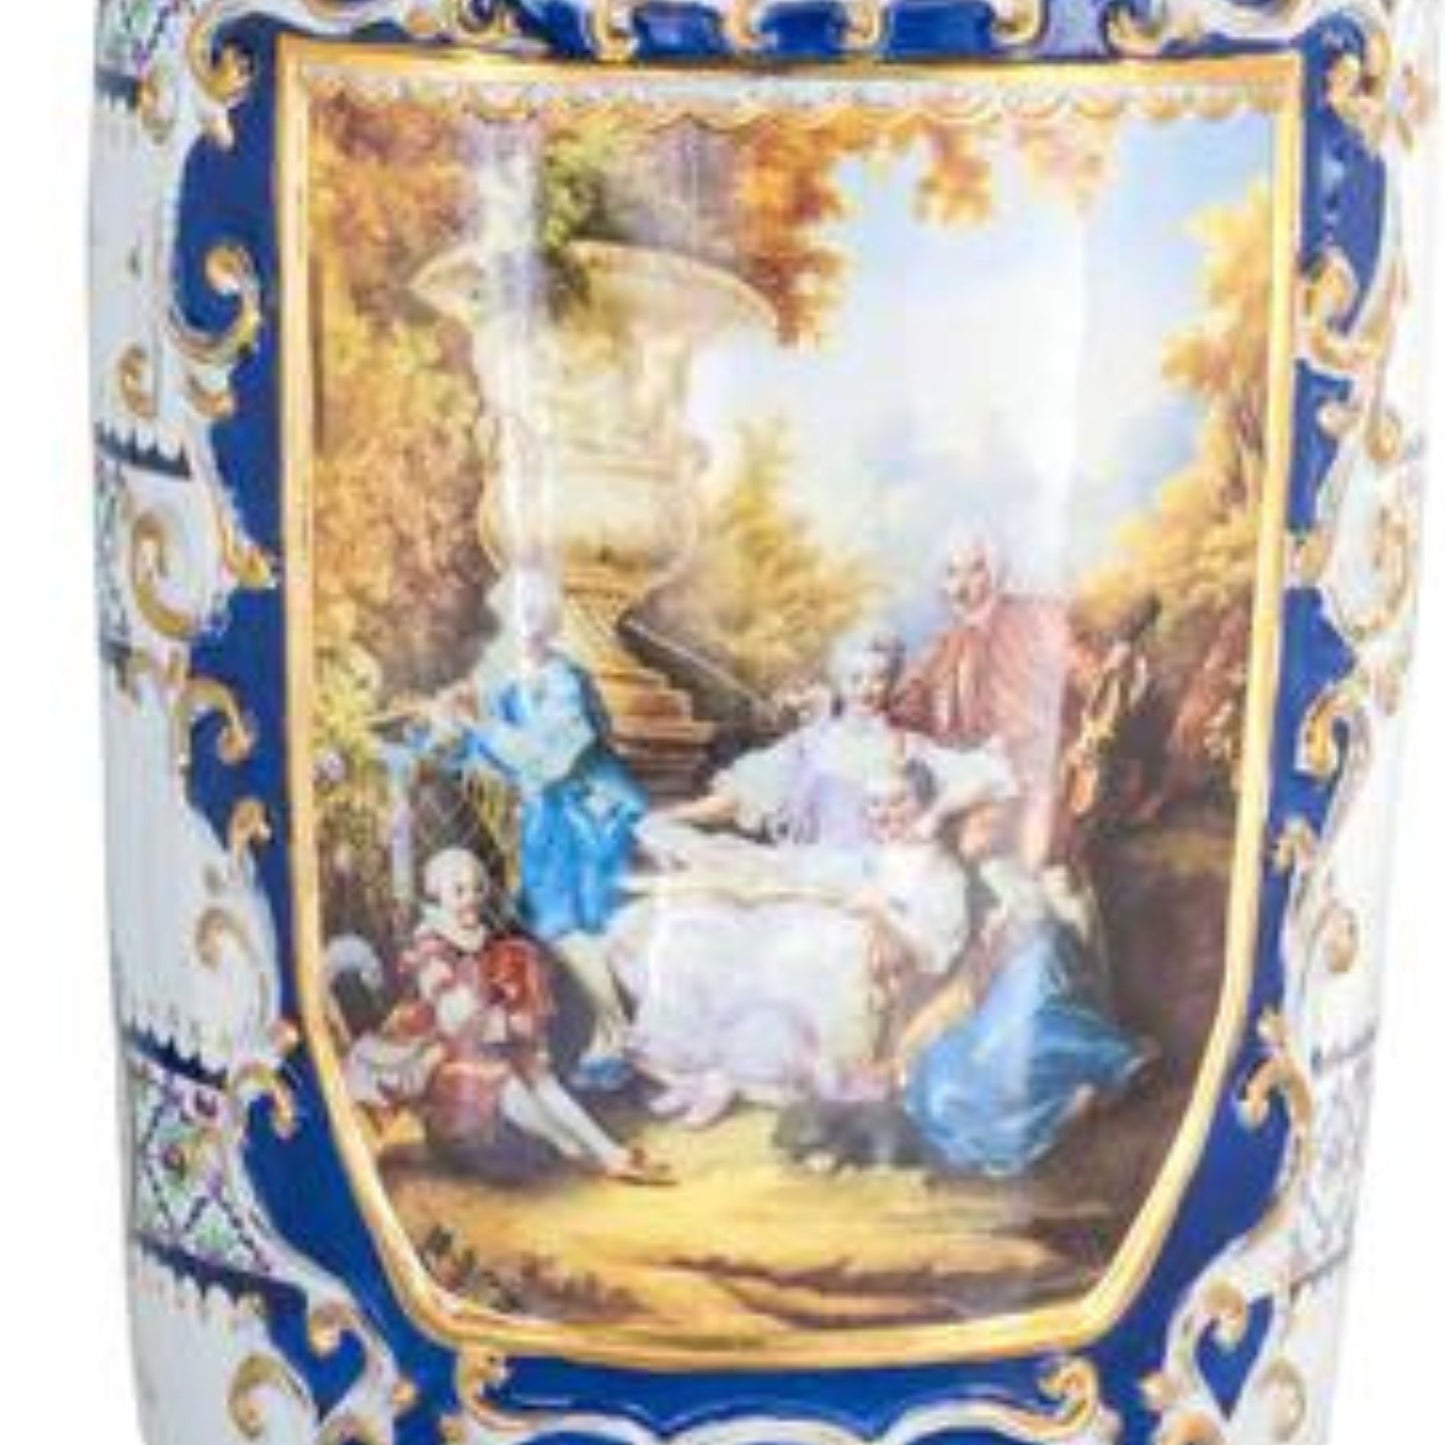 Hand-painted Rococo Style Motif Vase in White